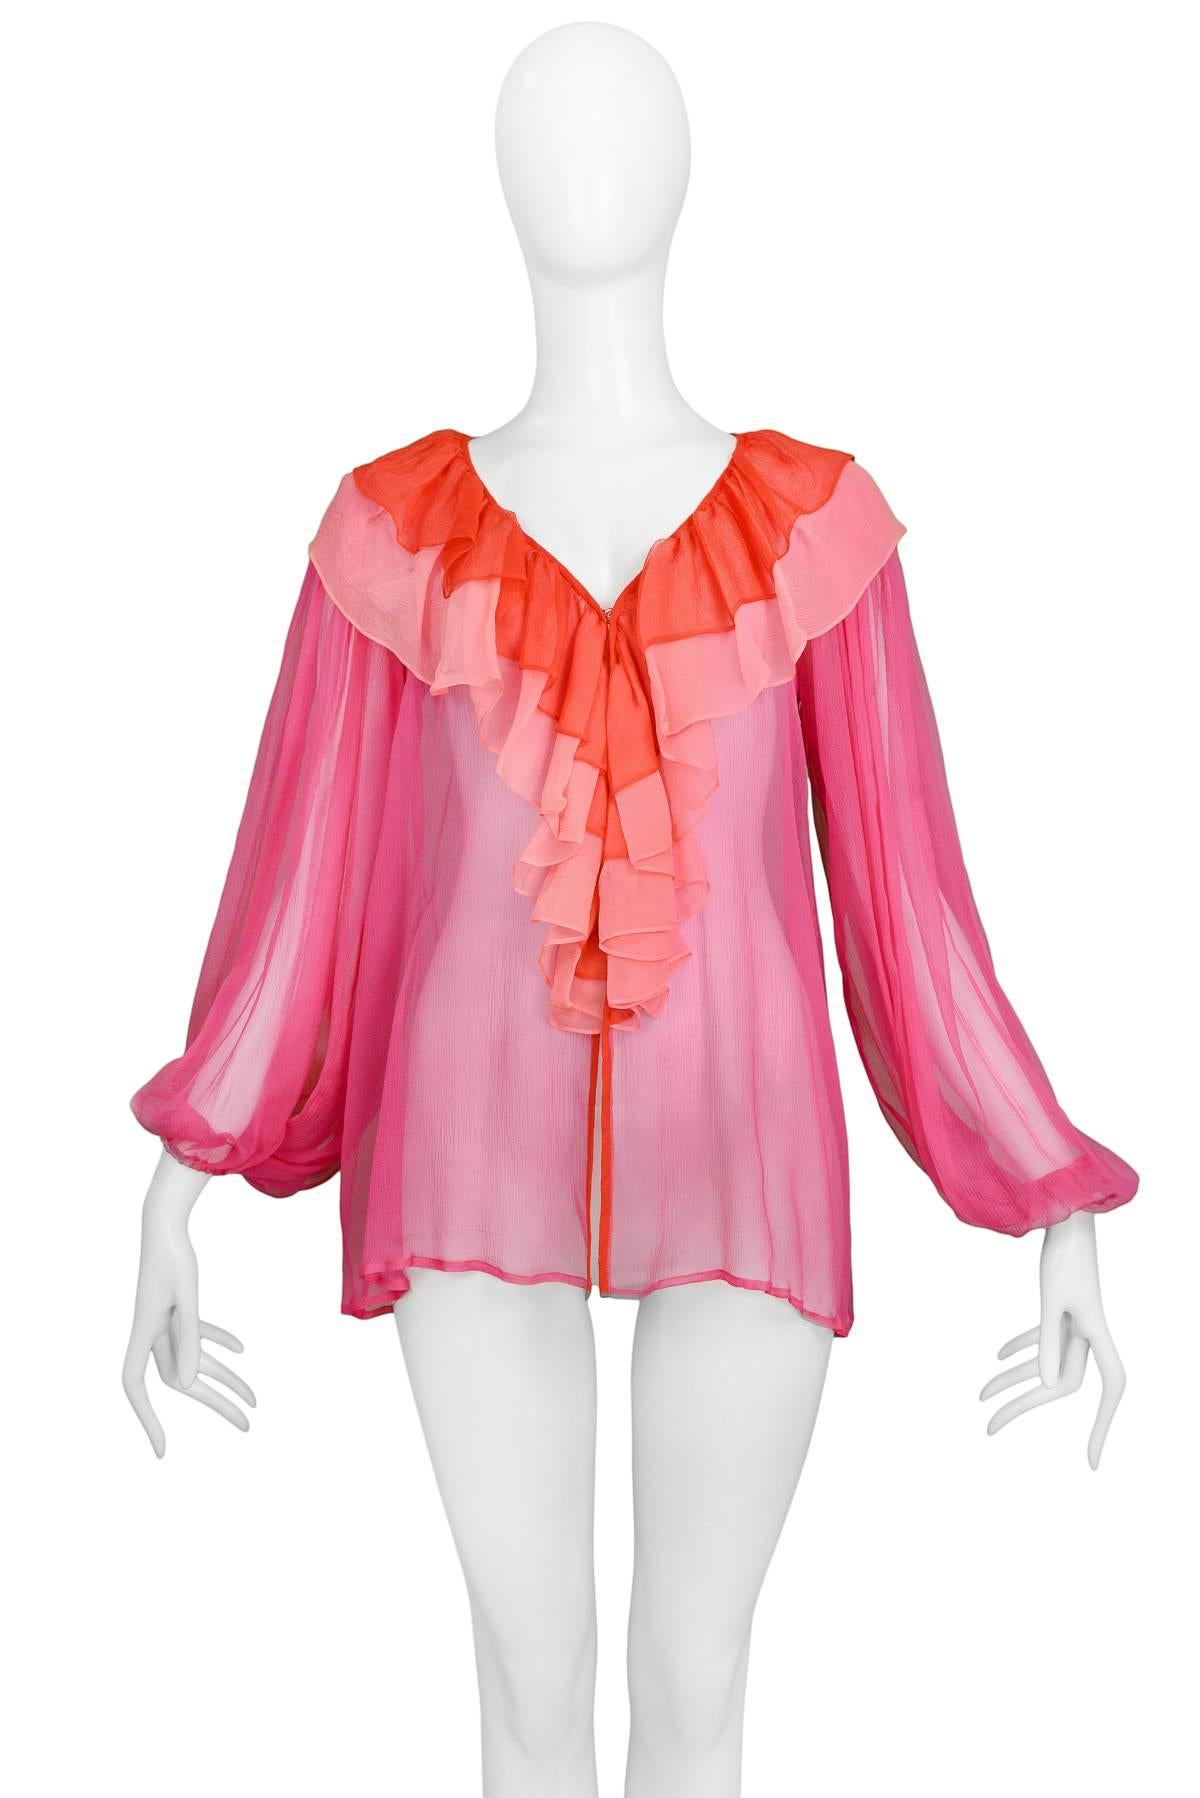 Women's Yves Saint Laurent Hot Pink & Red Chiffon Peasant Blouse & Giant Ruffle Scarf